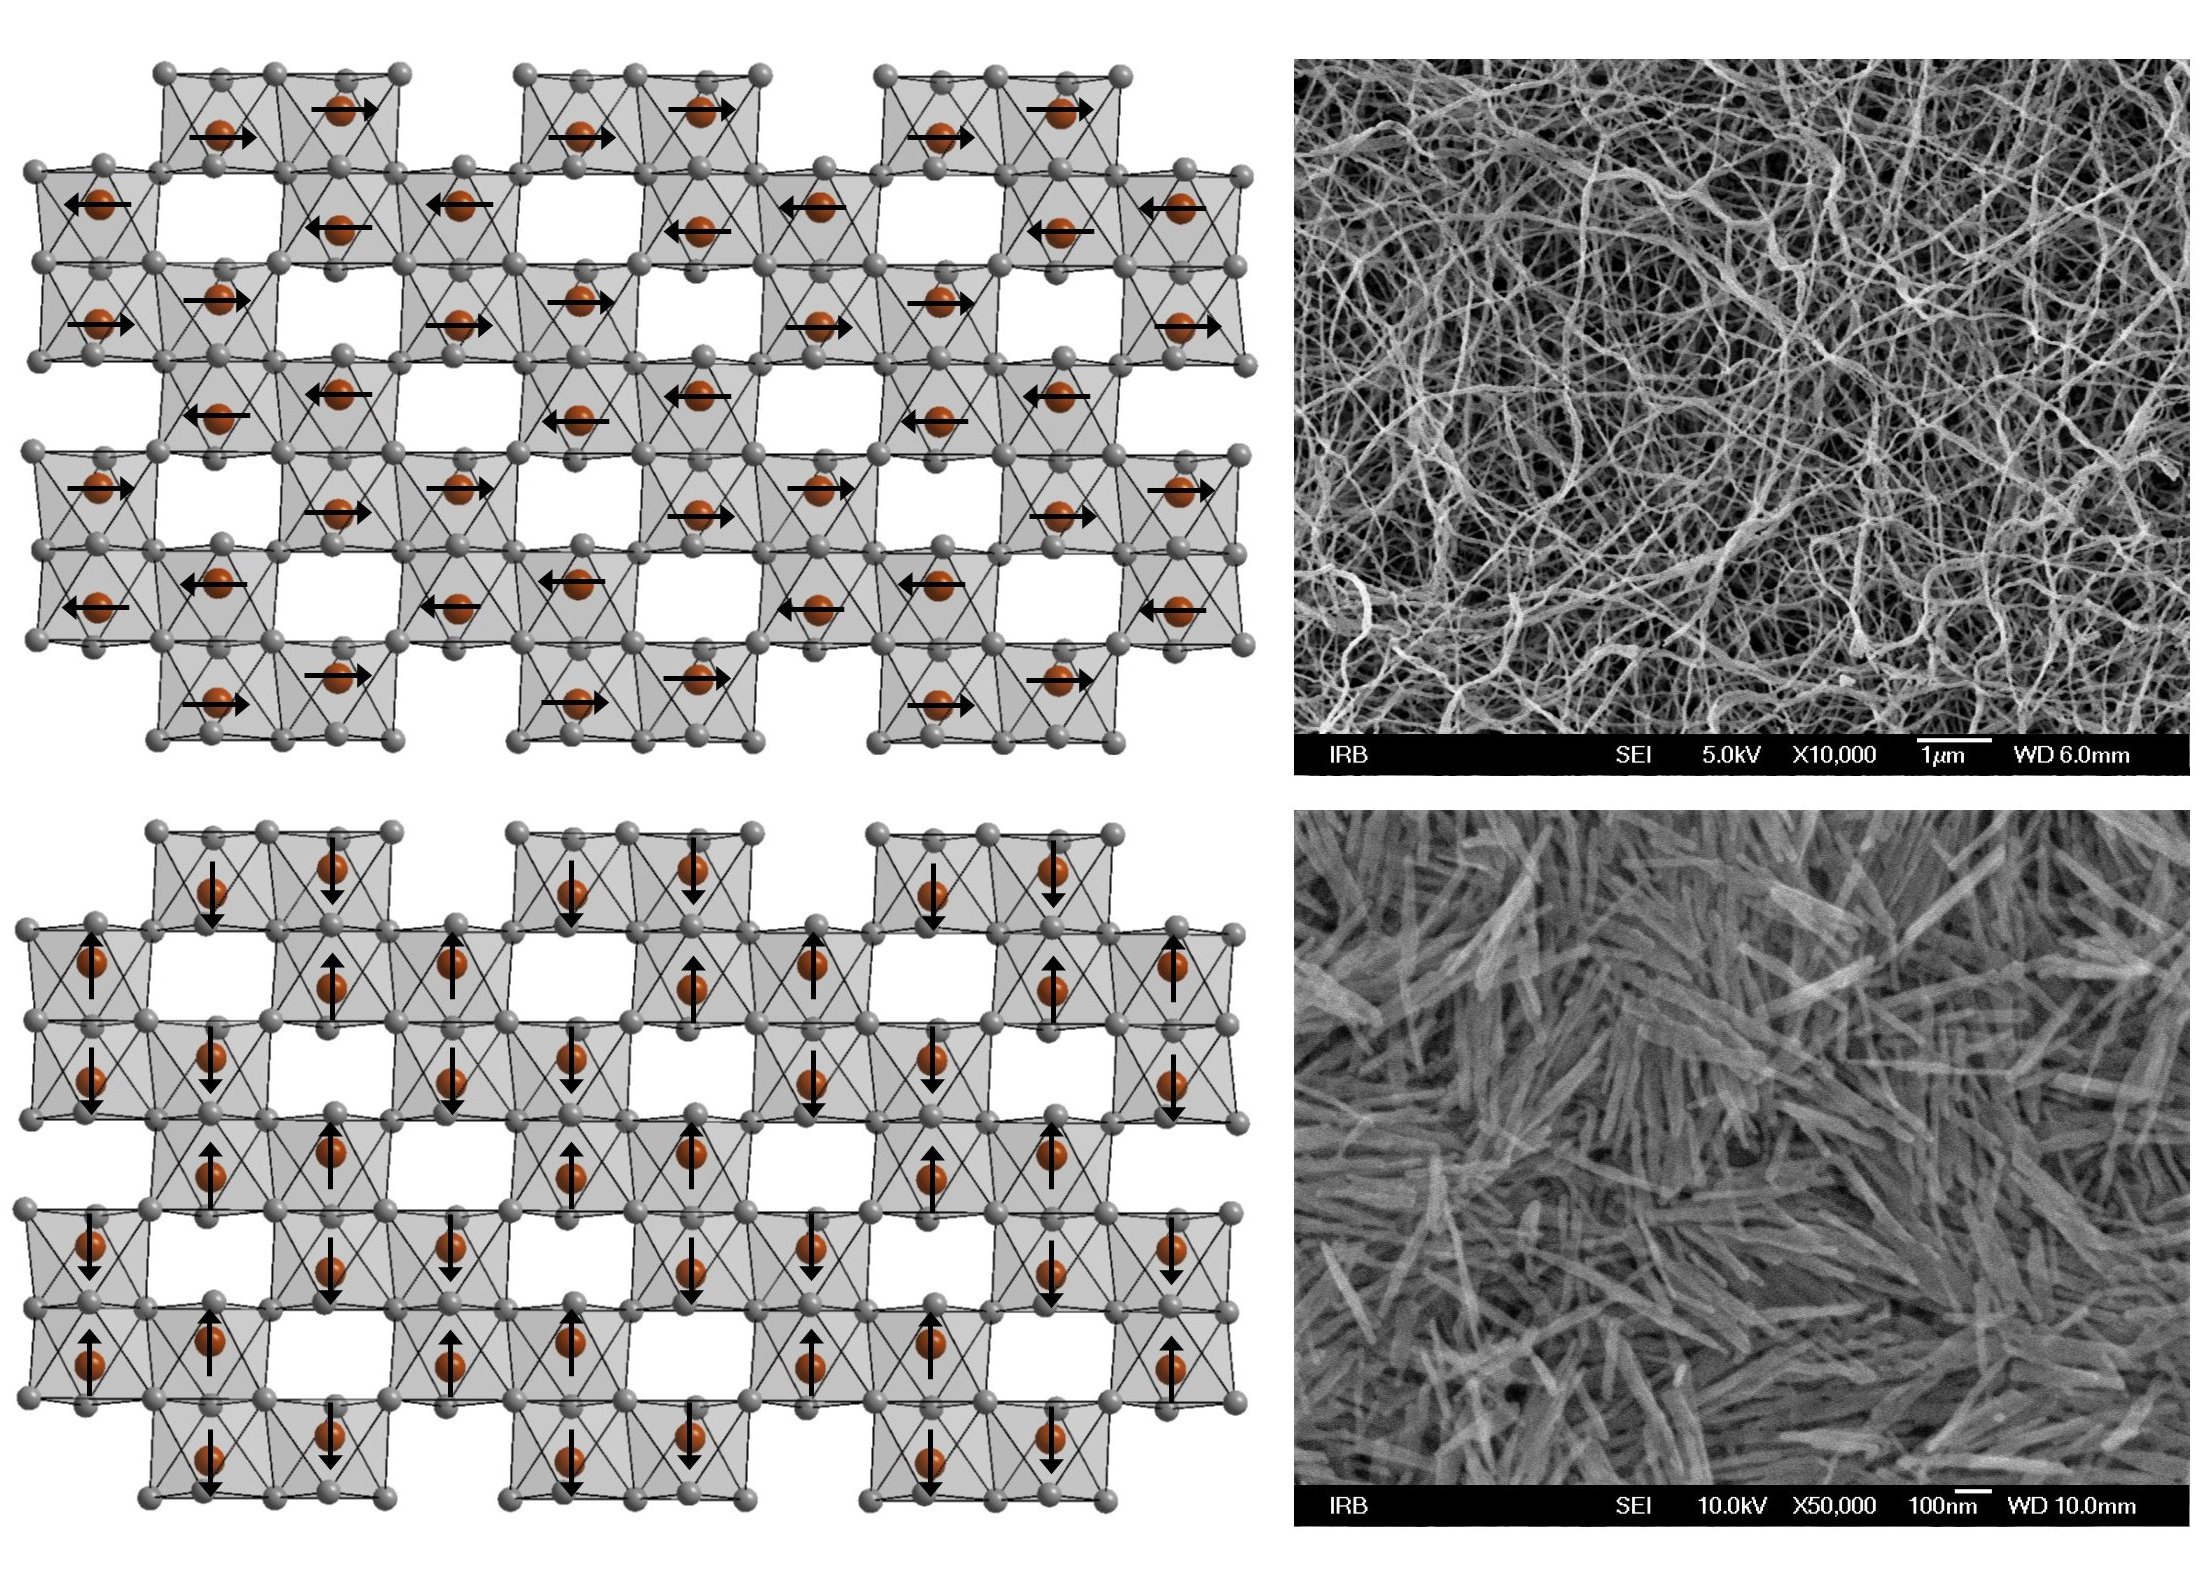 Formation and properties of 1D α-Fe2O3 nanostructures doped with selected metal ions